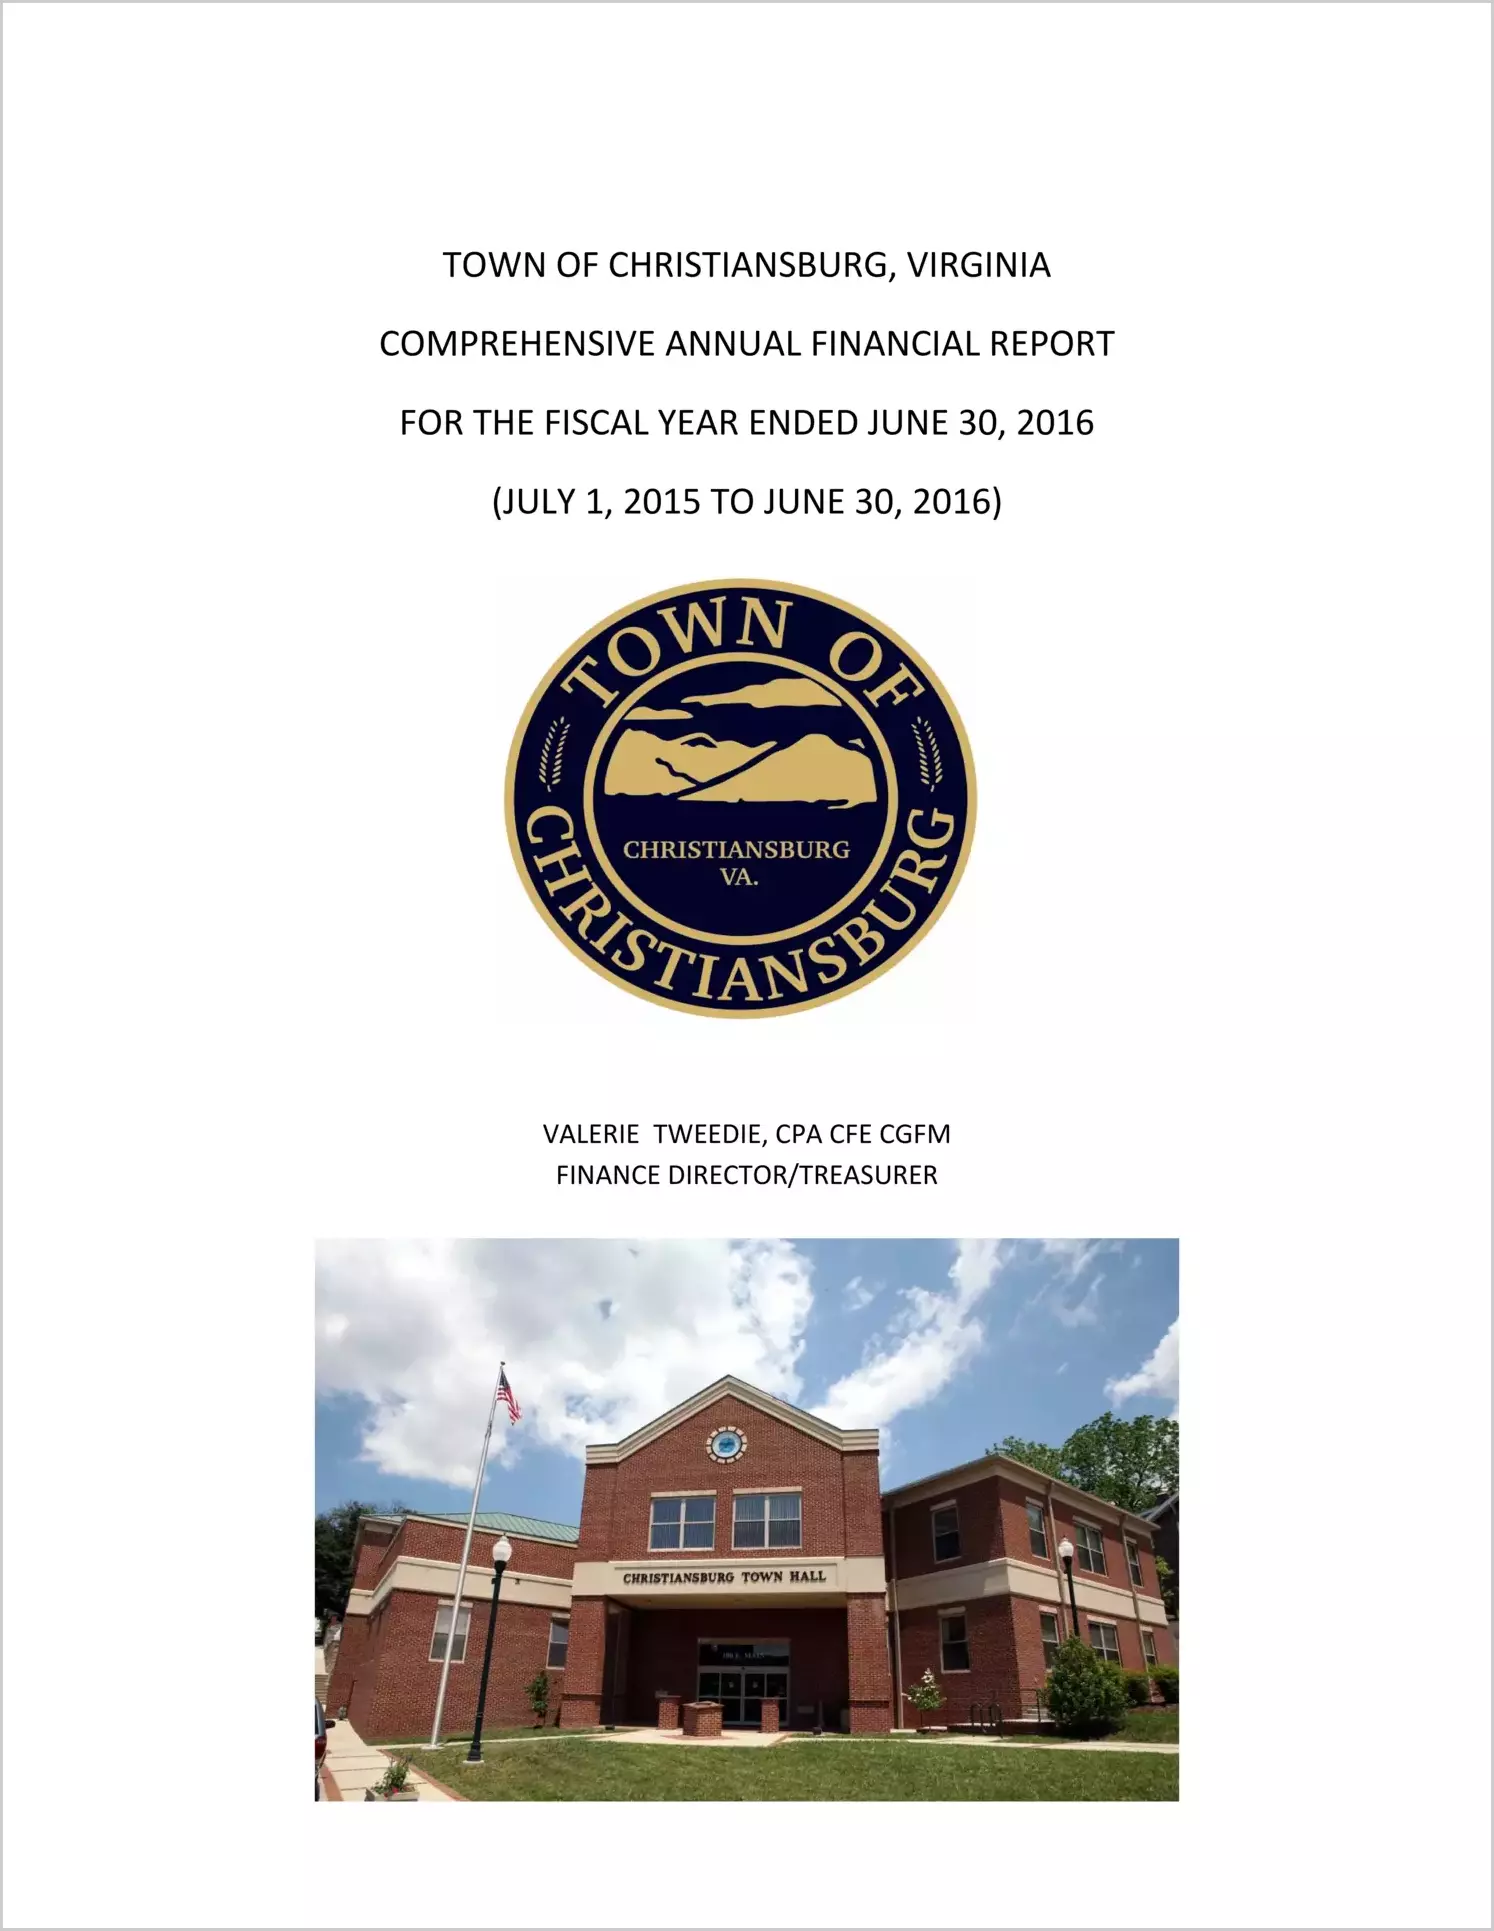 2016 Annual Financial Report for Town of Christiansburg